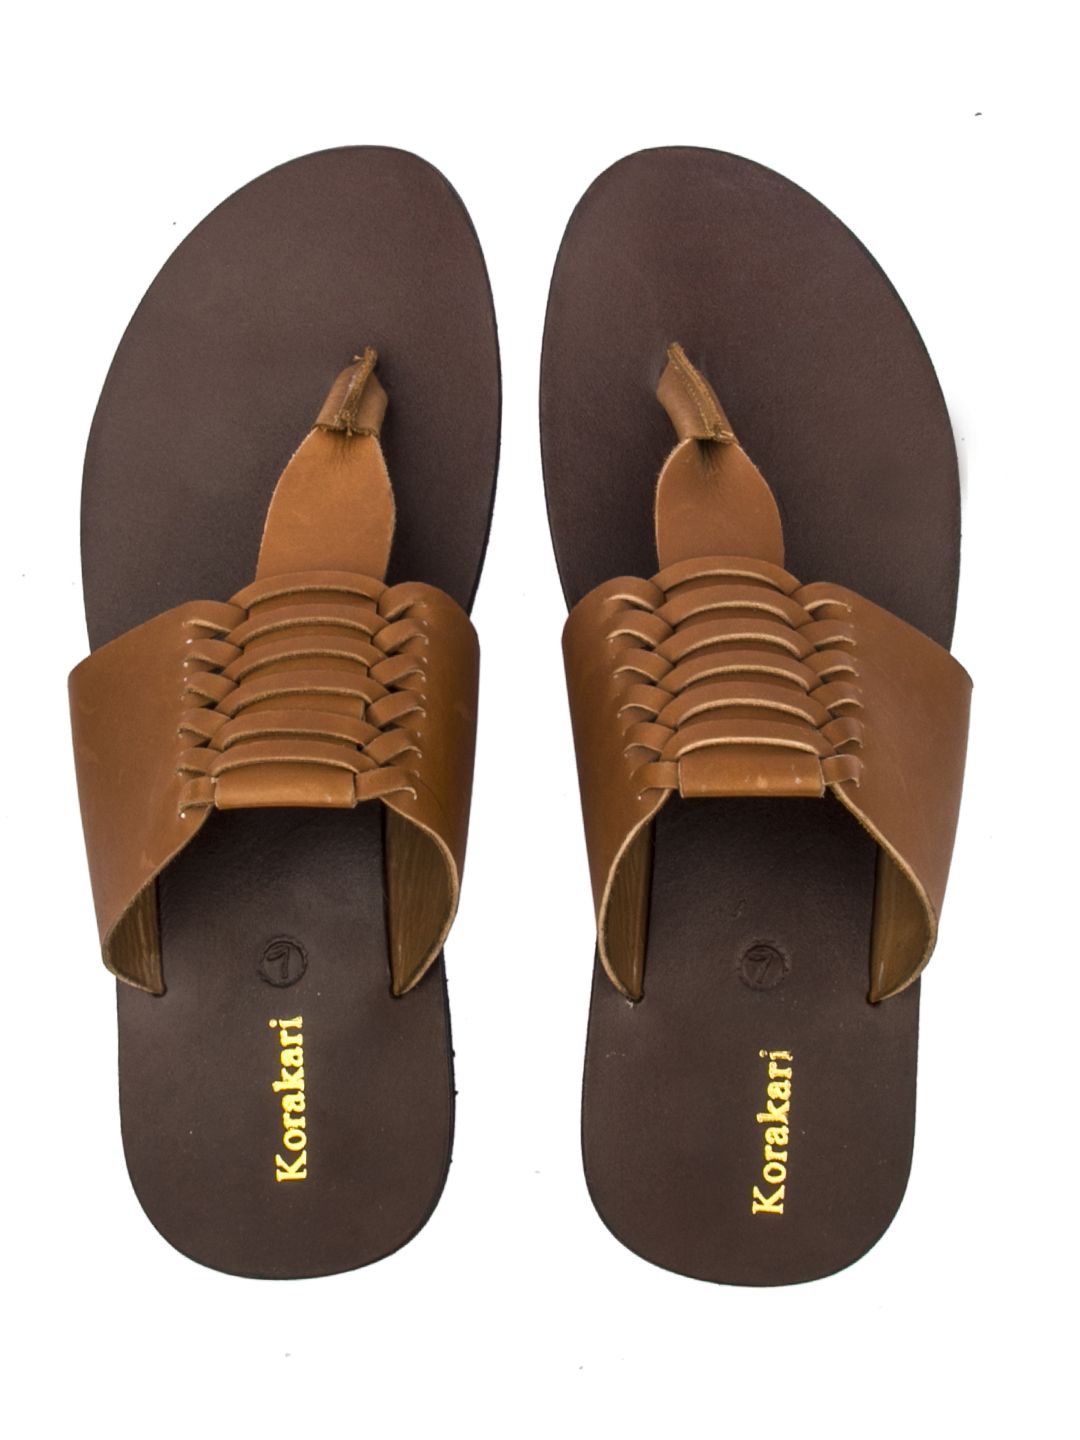 Timeless Roman Elegance: Handmade Tan and Brown Leather Sandals for Men